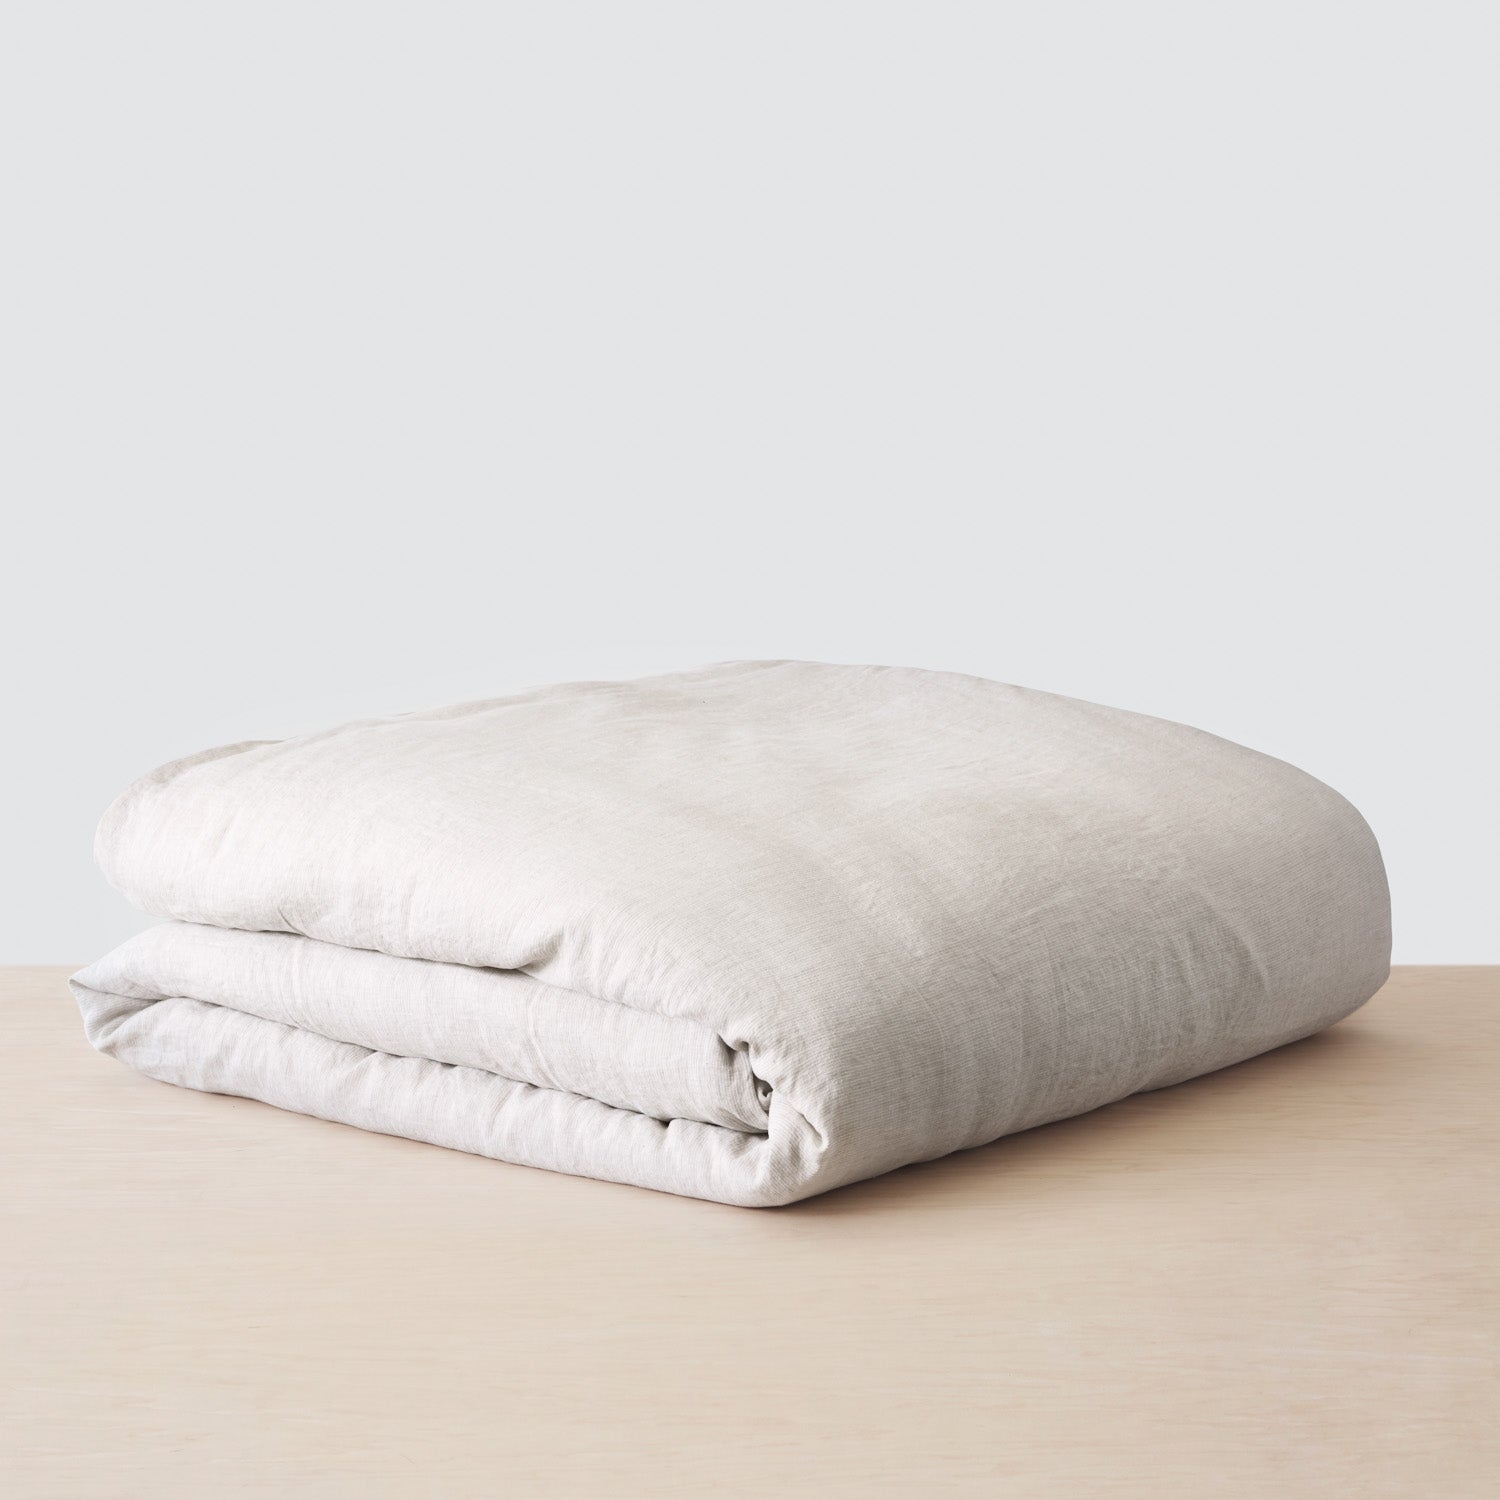 The Citizenry Stonewashed Linen Duvet Cover | Full/Queen | Duvet Only | Sand - Image 8